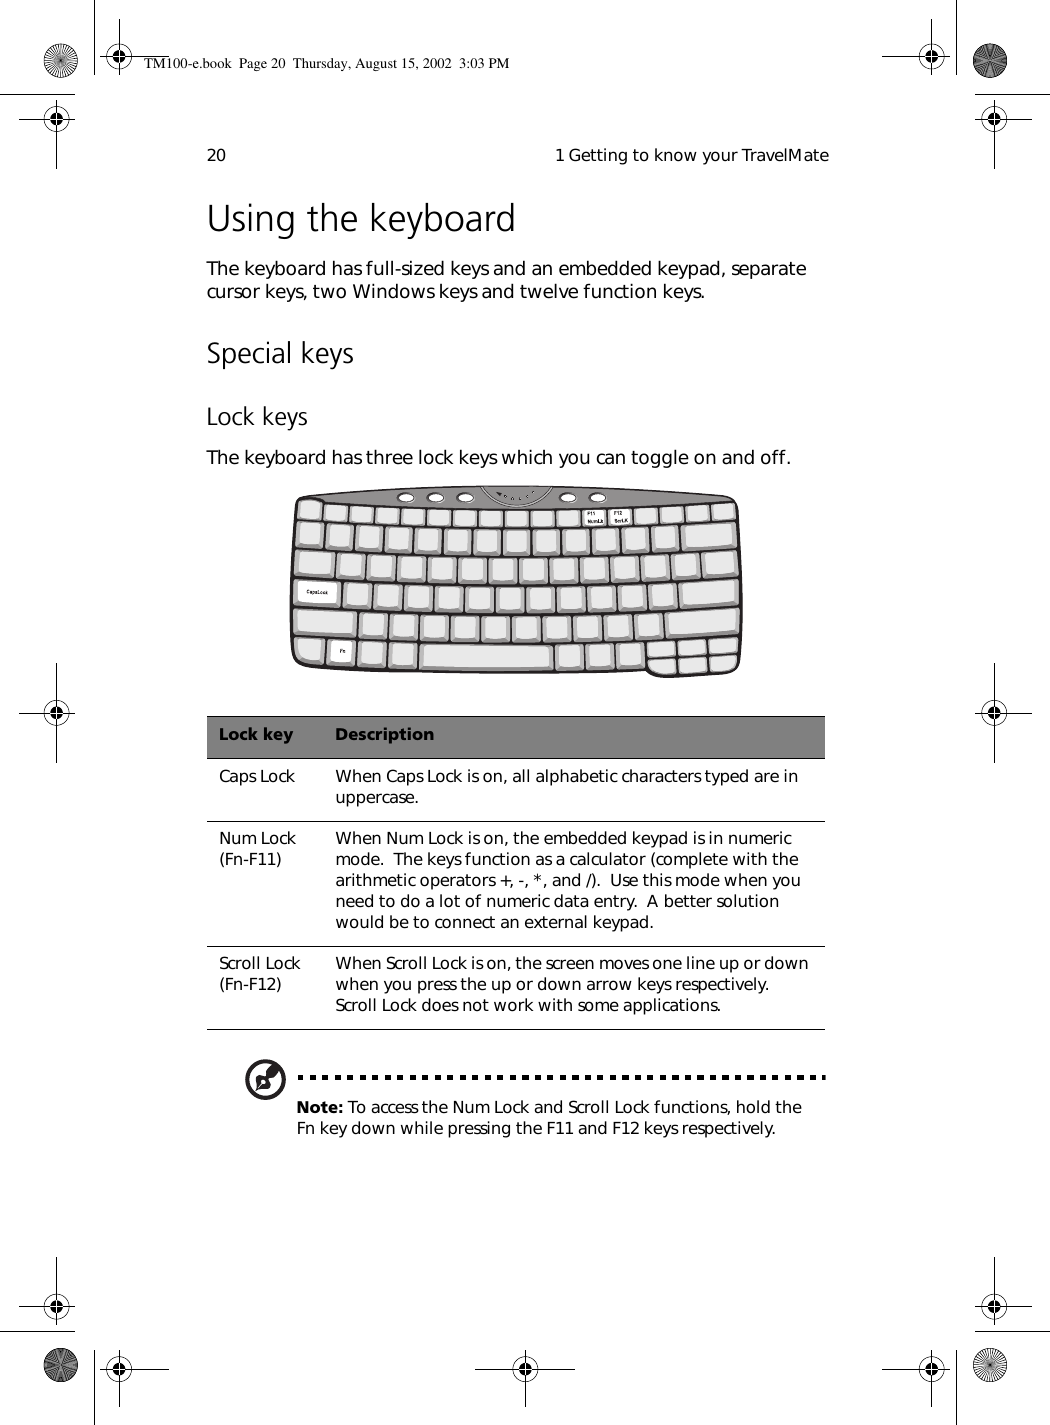  1 Getting to know your TravelMate20Using the keyboardThe keyboard has full-sized keys and an embedded keypad, separate cursor keys, two Windows keys and twelve function keys.Special keysLock keysThe keyboard has three lock keys which you can toggle on and off.   Note: To access the Num Lock and Scroll Lock functions, hold the Fn key down while pressing the F11 and F12 keys respectively.Lock key DescriptionCaps Lock When Caps Lock is on, all alphabetic characters typed are in uppercase.Num Lock (Fn-F11) When Num Lock is on, the embedded keypad is in numeric mode.  The keys function as a calculator (complete with the arithmetic operators +, -, *, and /).  Use this mode when you need to do a lot of numeric data entry.  A better solution would be to connect an external keypad.Scroll Lock (Fn-F12) When Scroll Lock is on, the screen moves one line up or down when you press the up or down arrow keys respectively.  Scroll Lock does not work with some applications.TM100-e.book Page 20 Thursday, August 15, 2002 3:03 PM